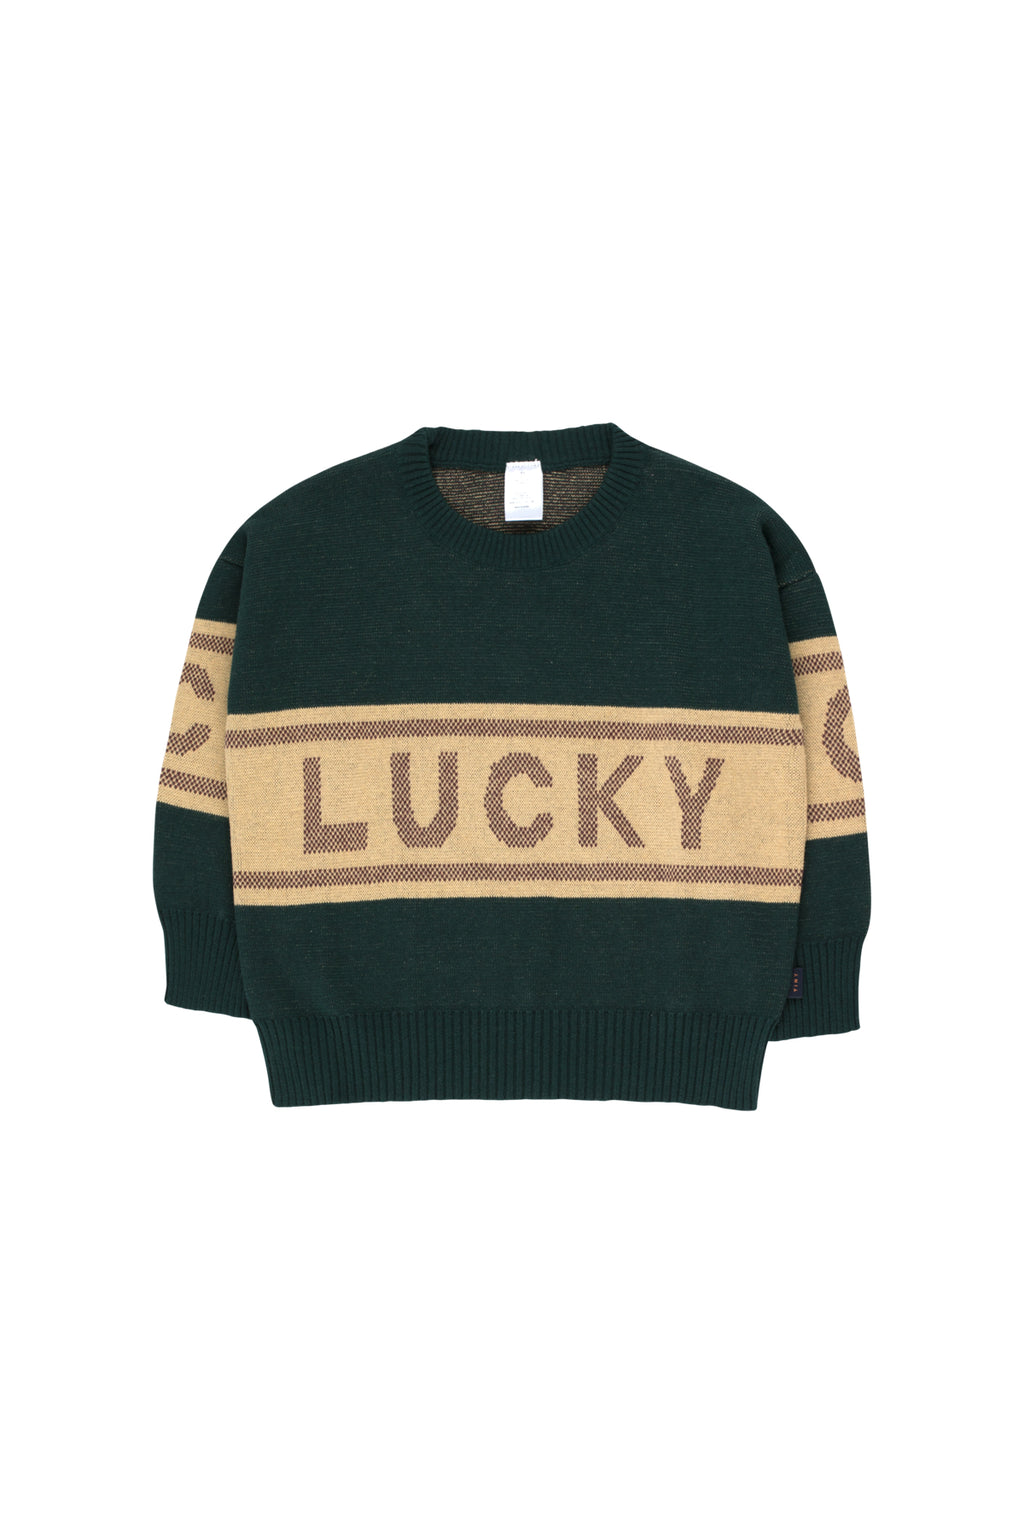 Tiny Cottons Lucky Sweater - Bottle Green/Sand